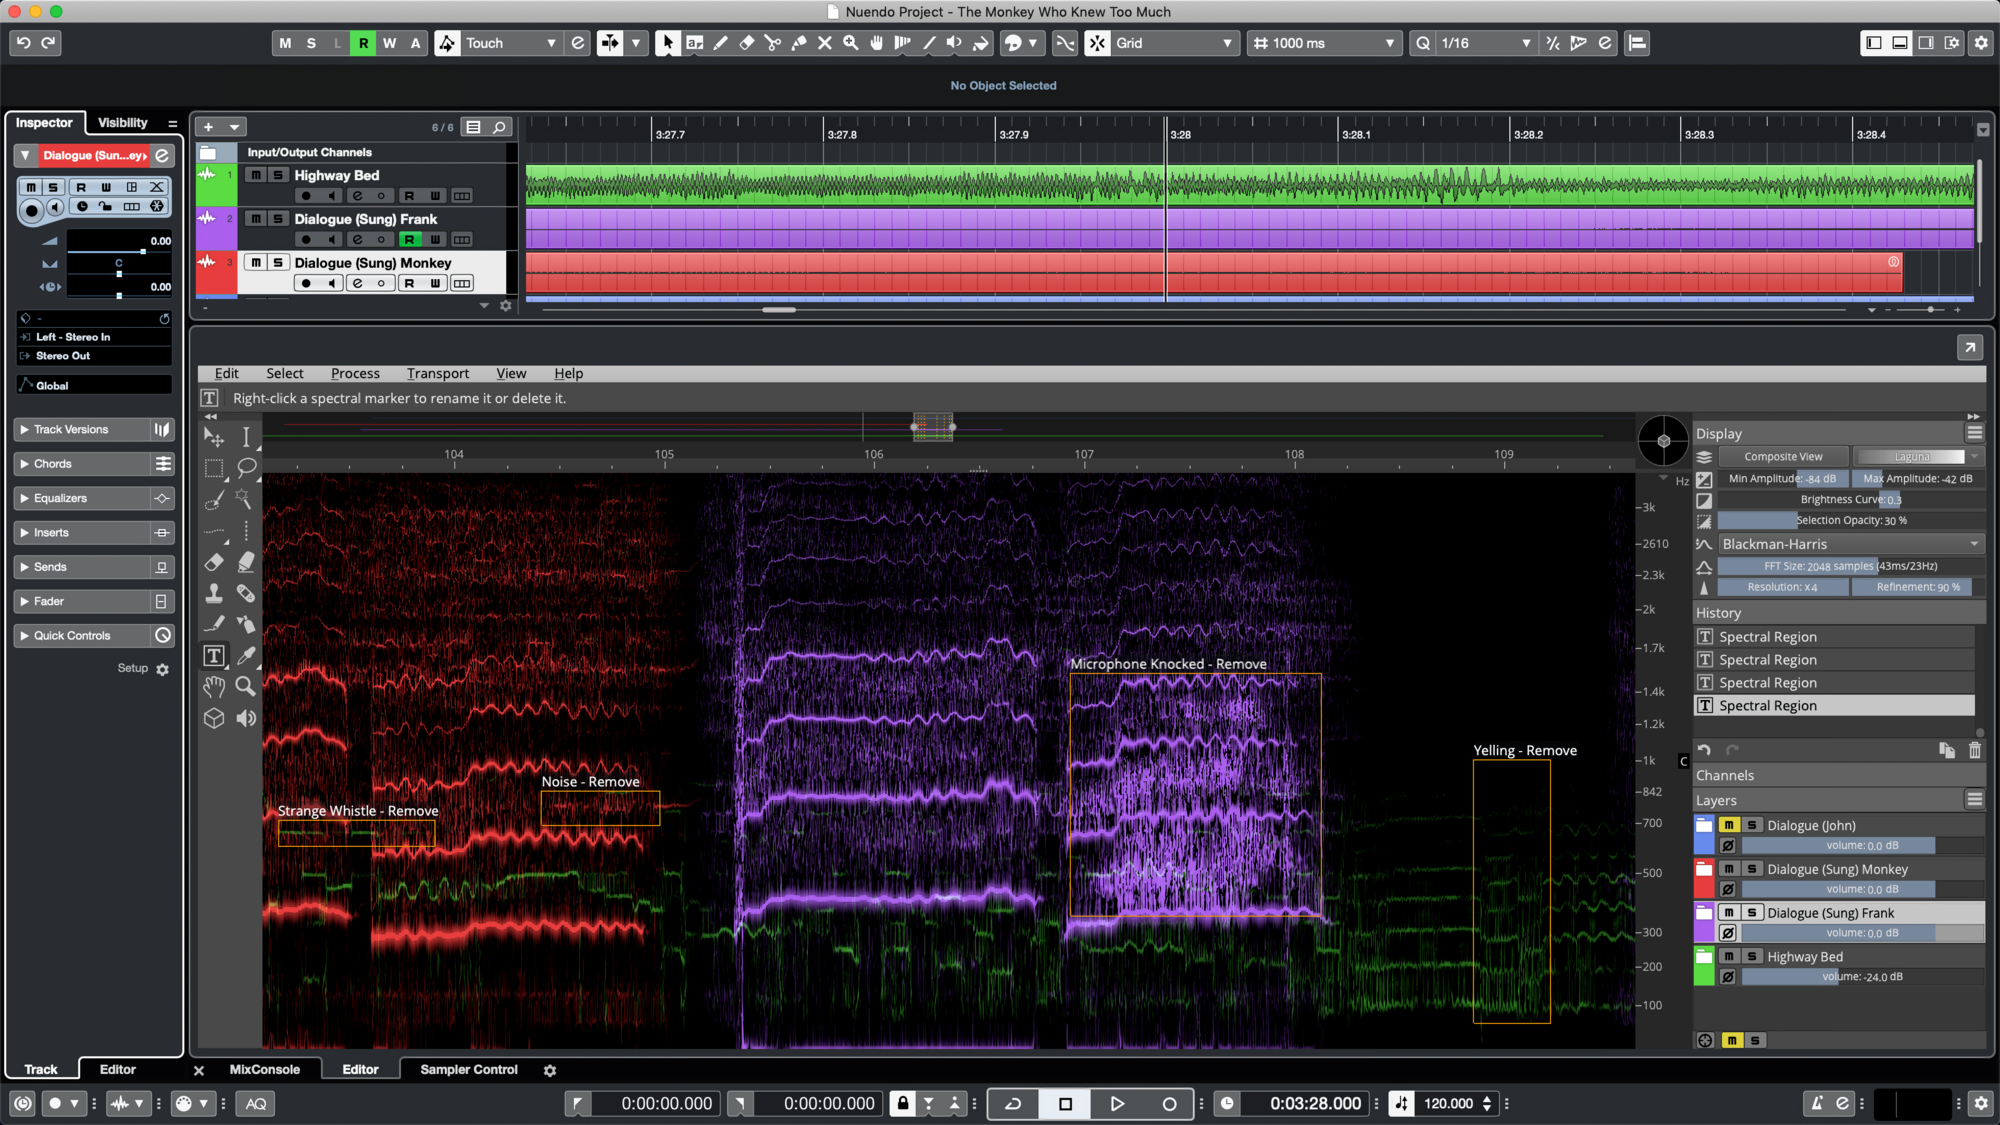 download the new version for apple MAGIX / Steinberg SpectraLayers Pro 10.0.10.329